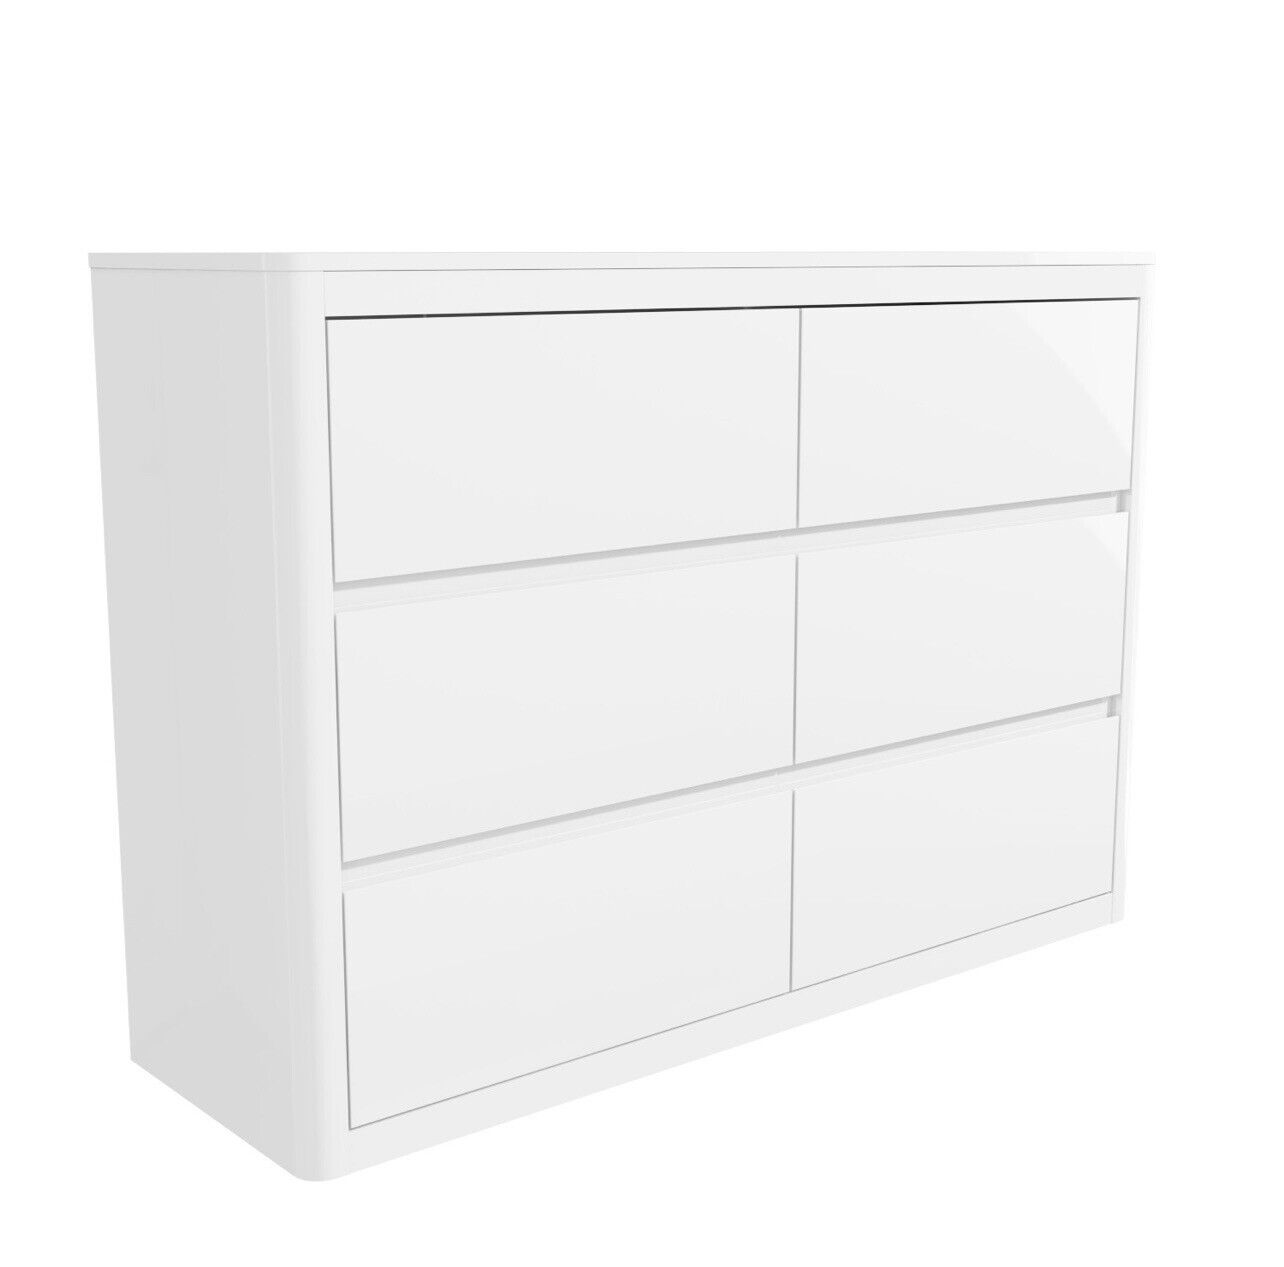 Chest of Drawers in White